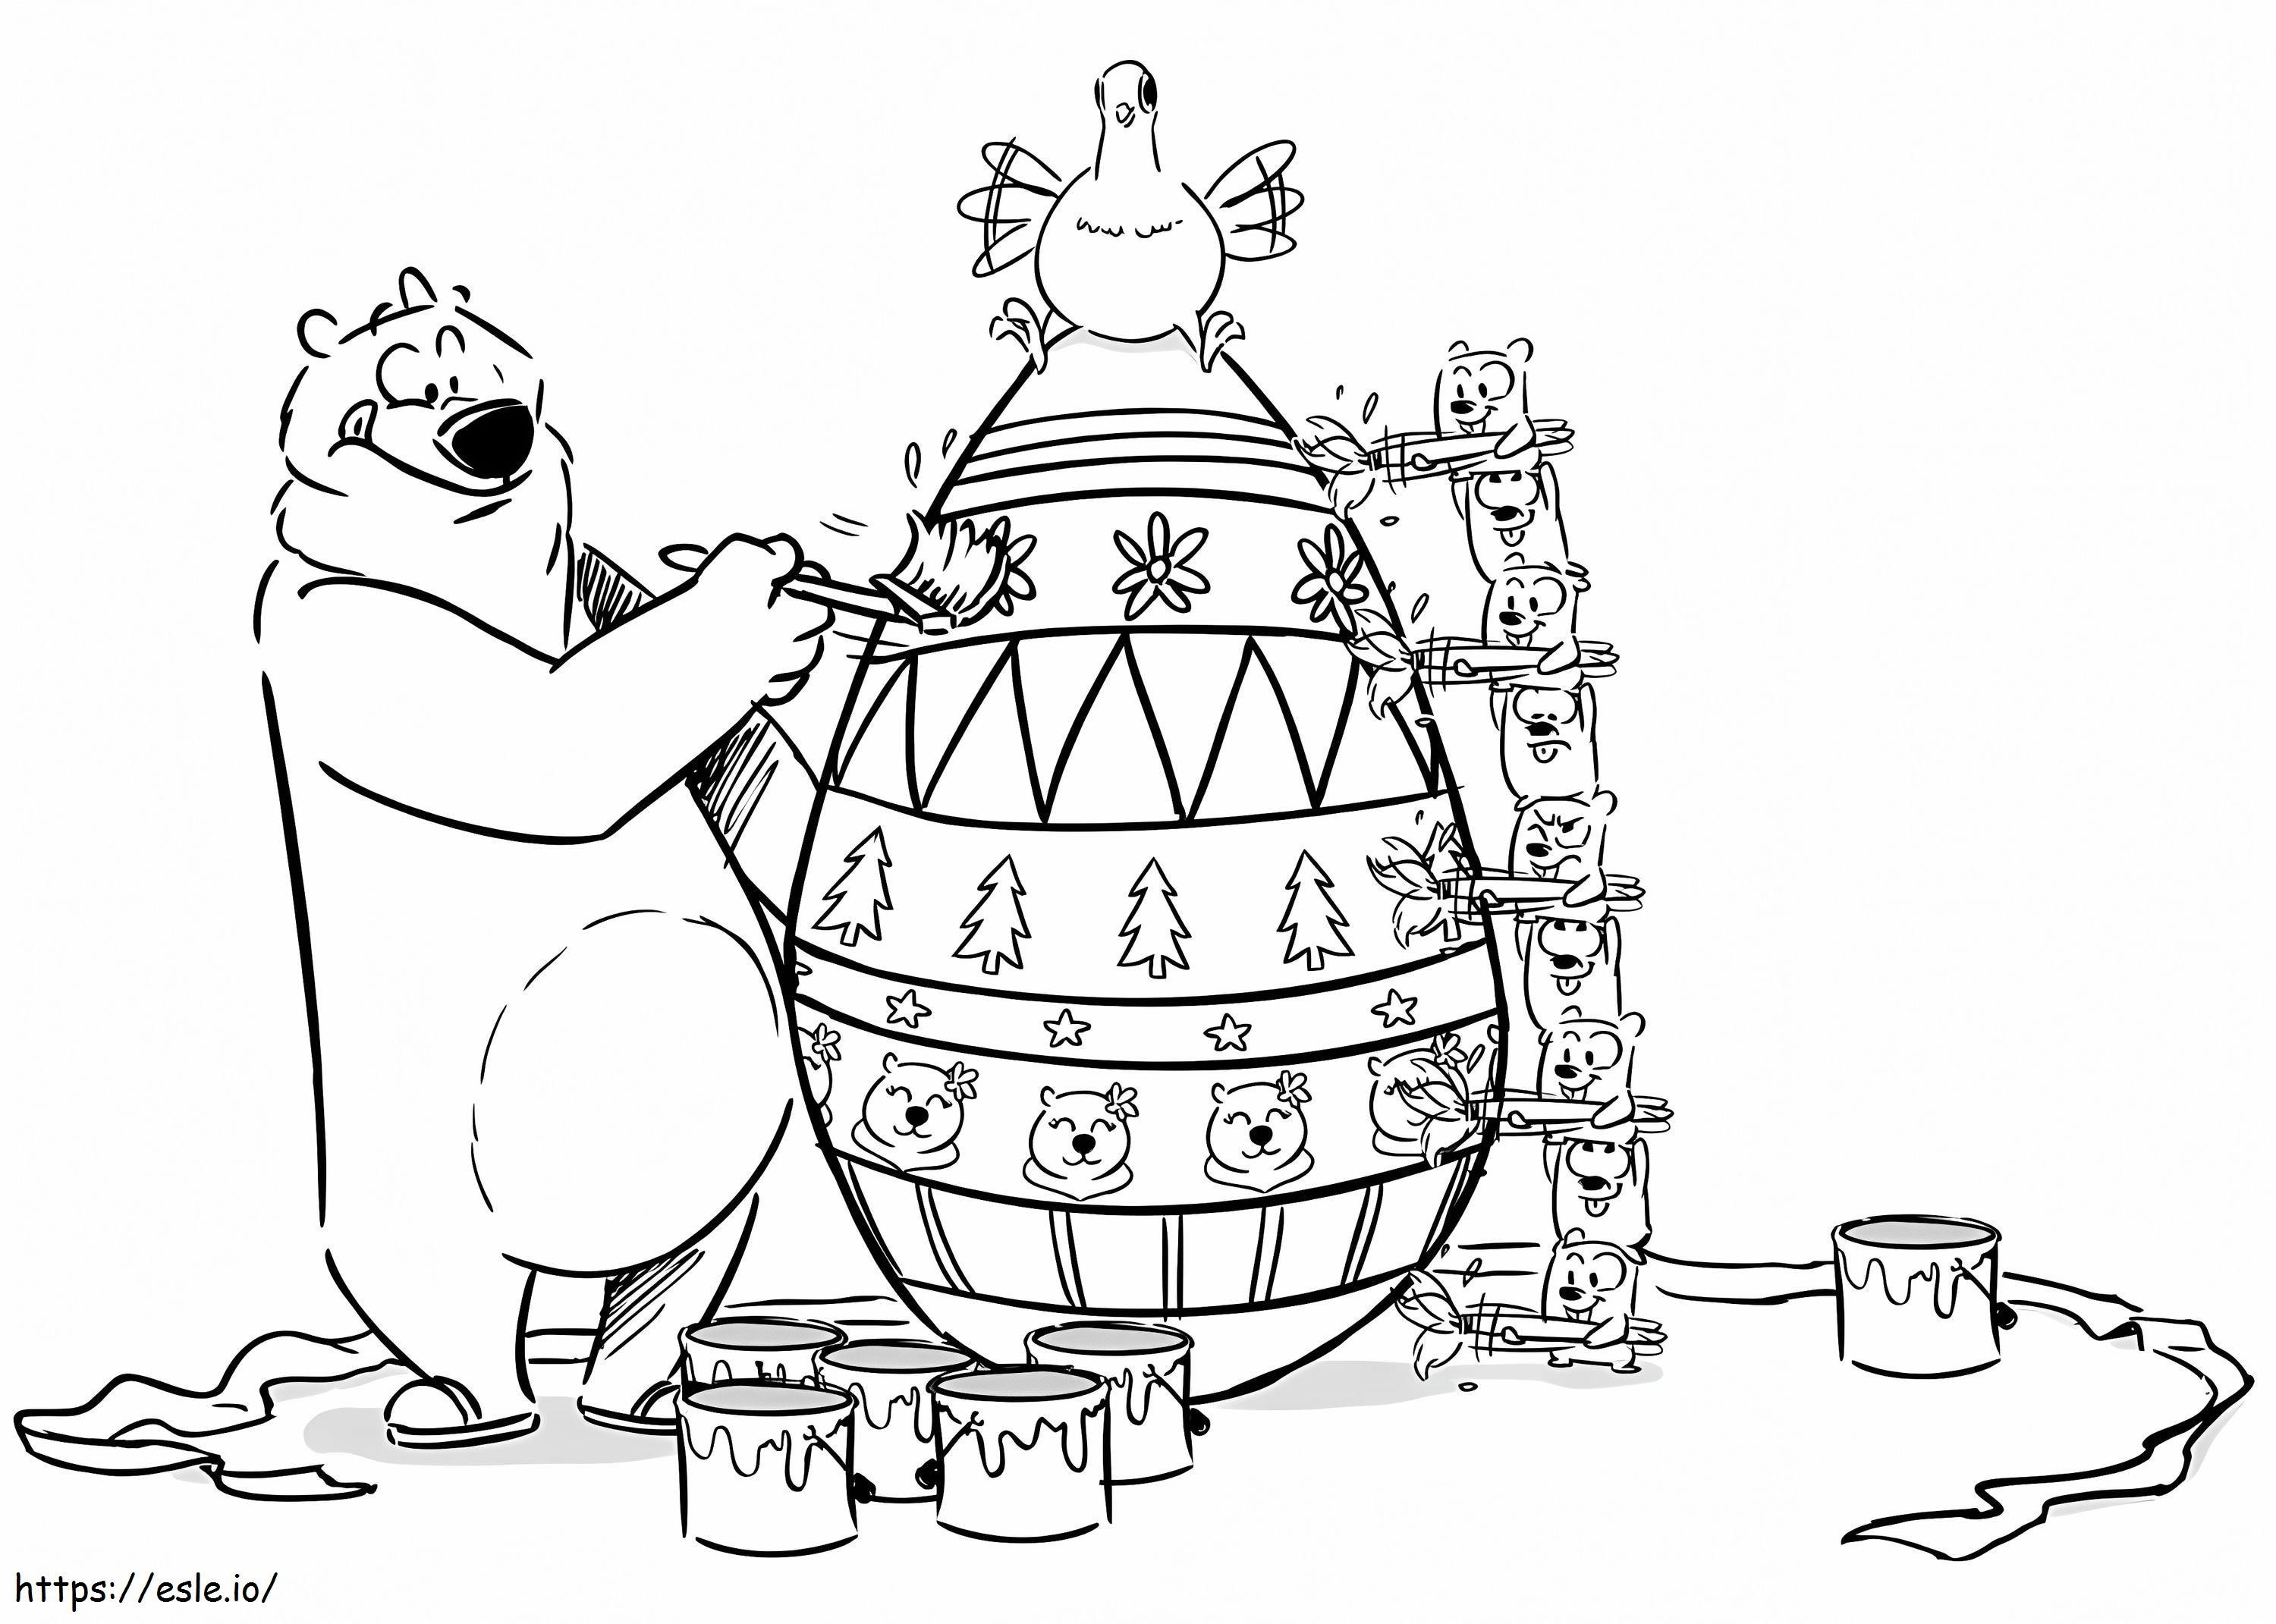 Easter With Grizzy And The Lemmings coloring page